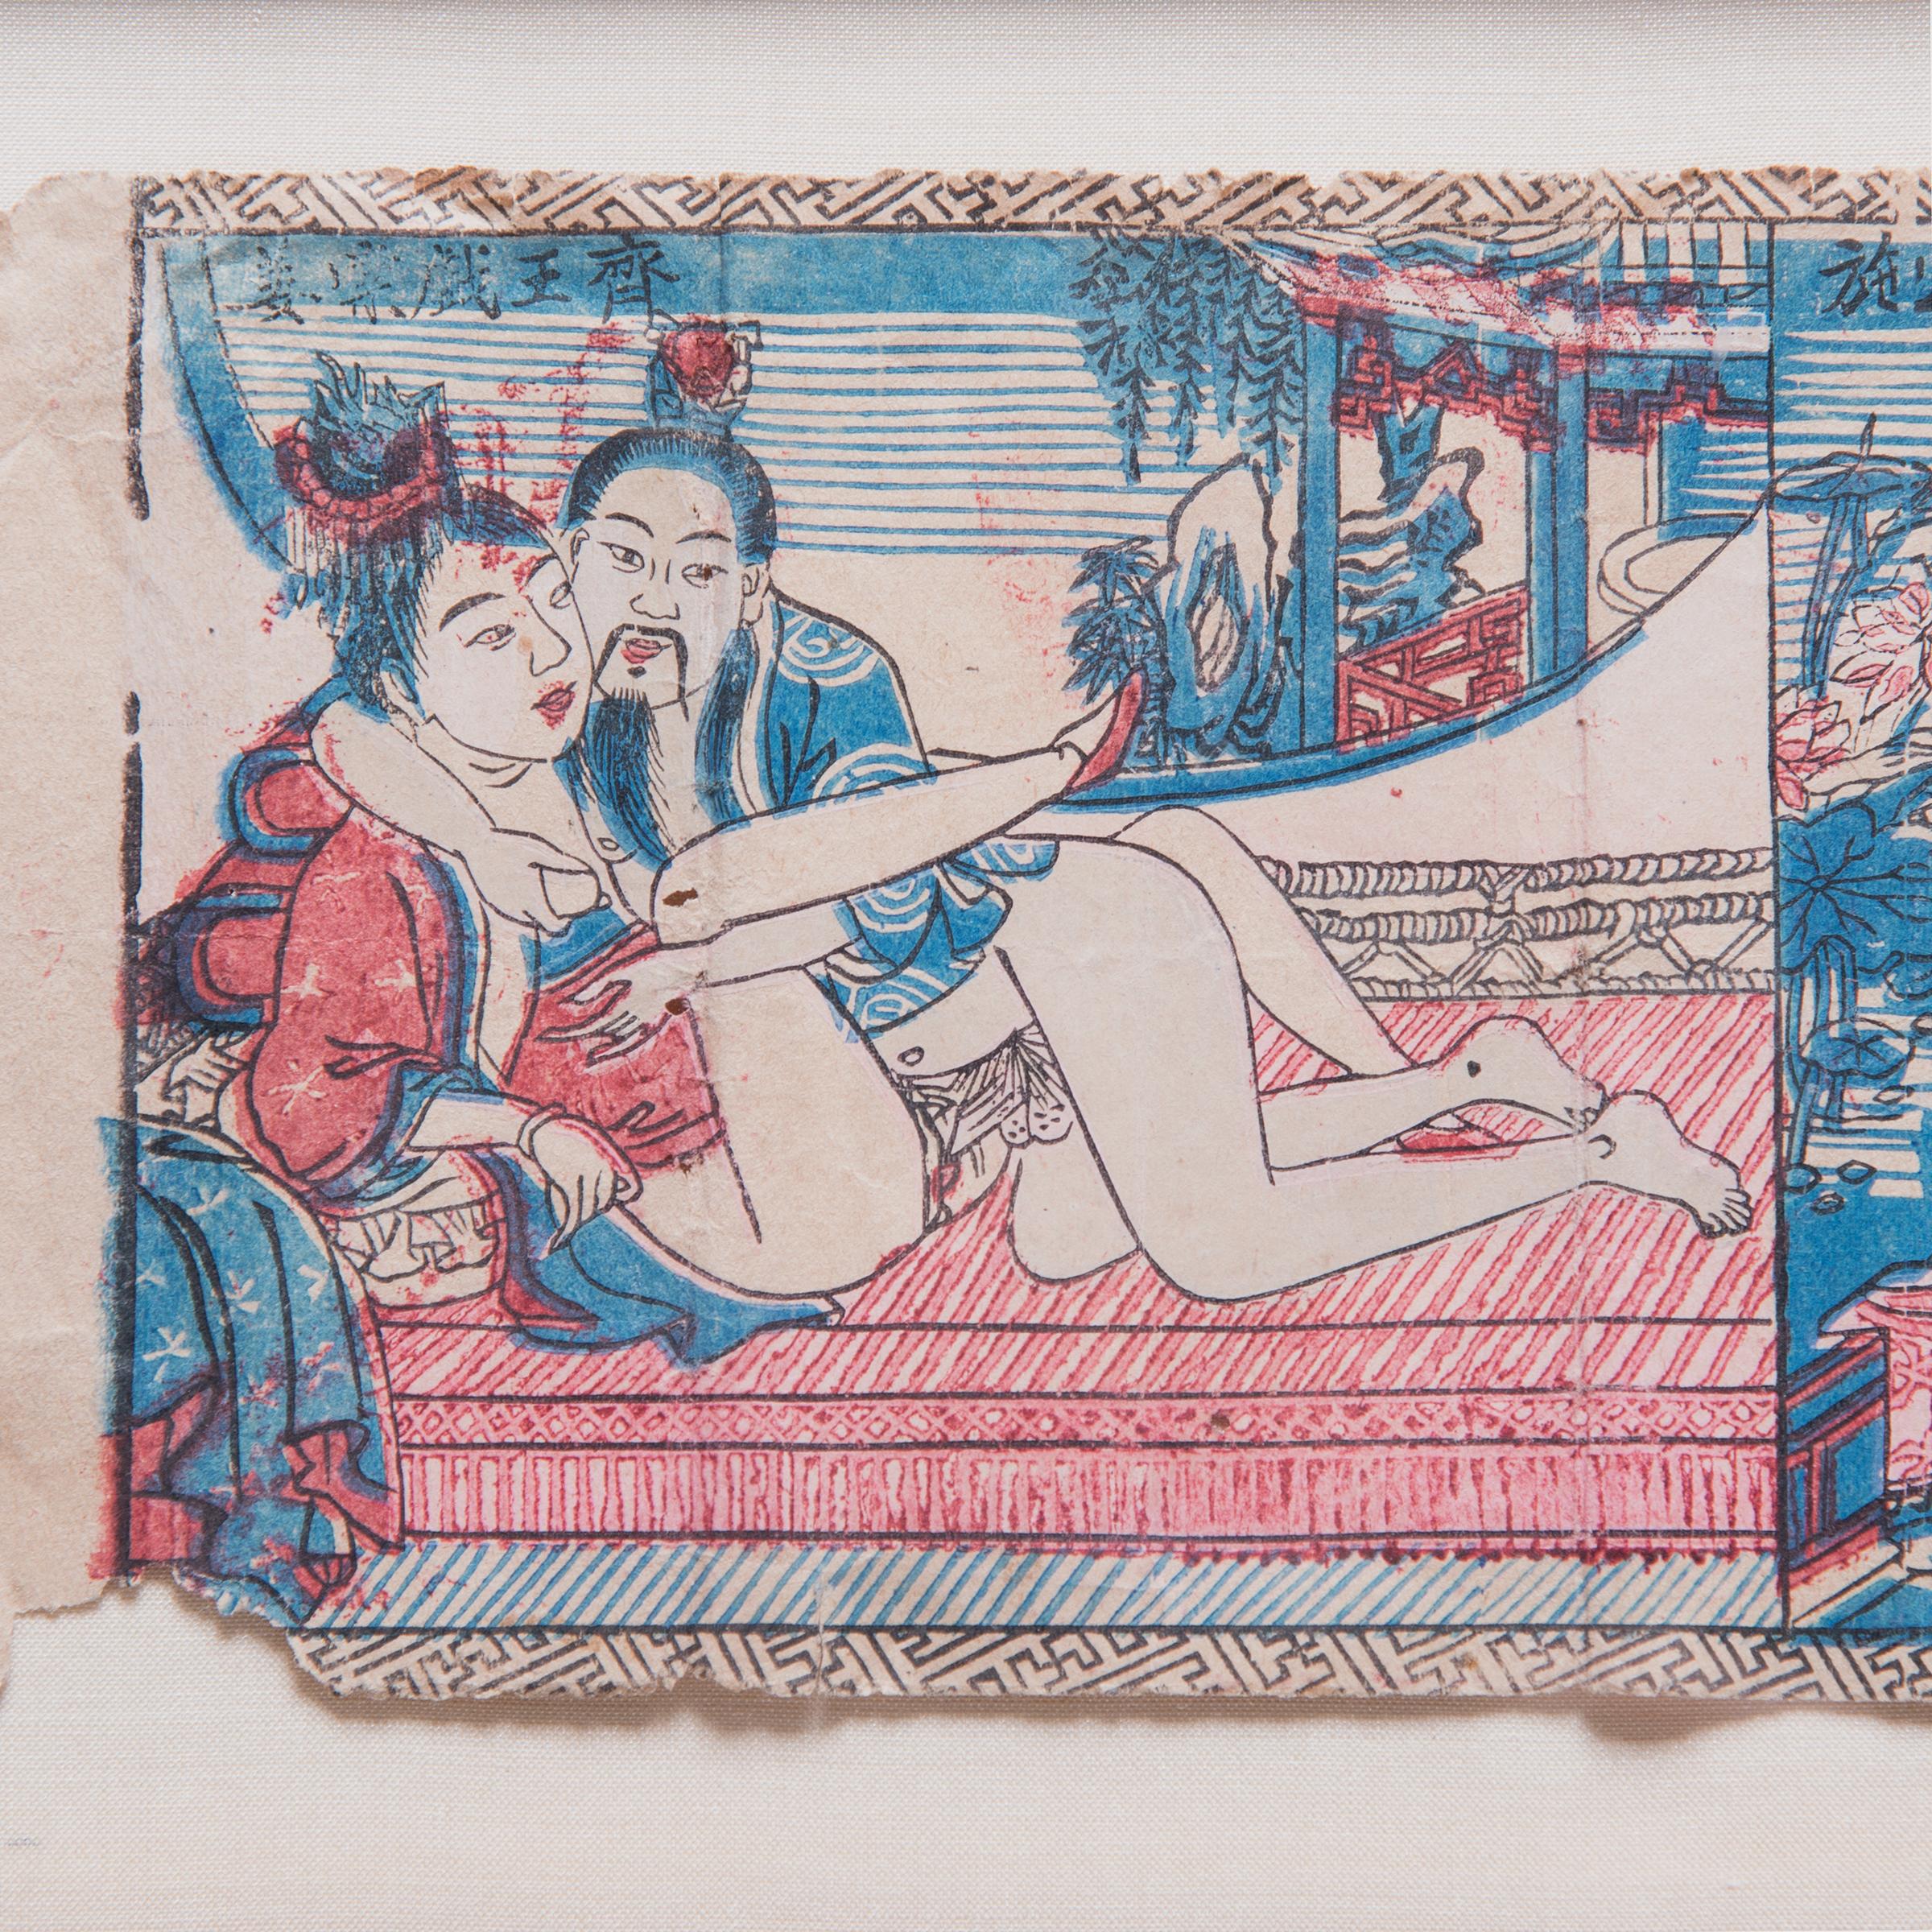 Framed Block Print Erotic Pillow Book, c. 1920 - Gray Nude Print by Unknown